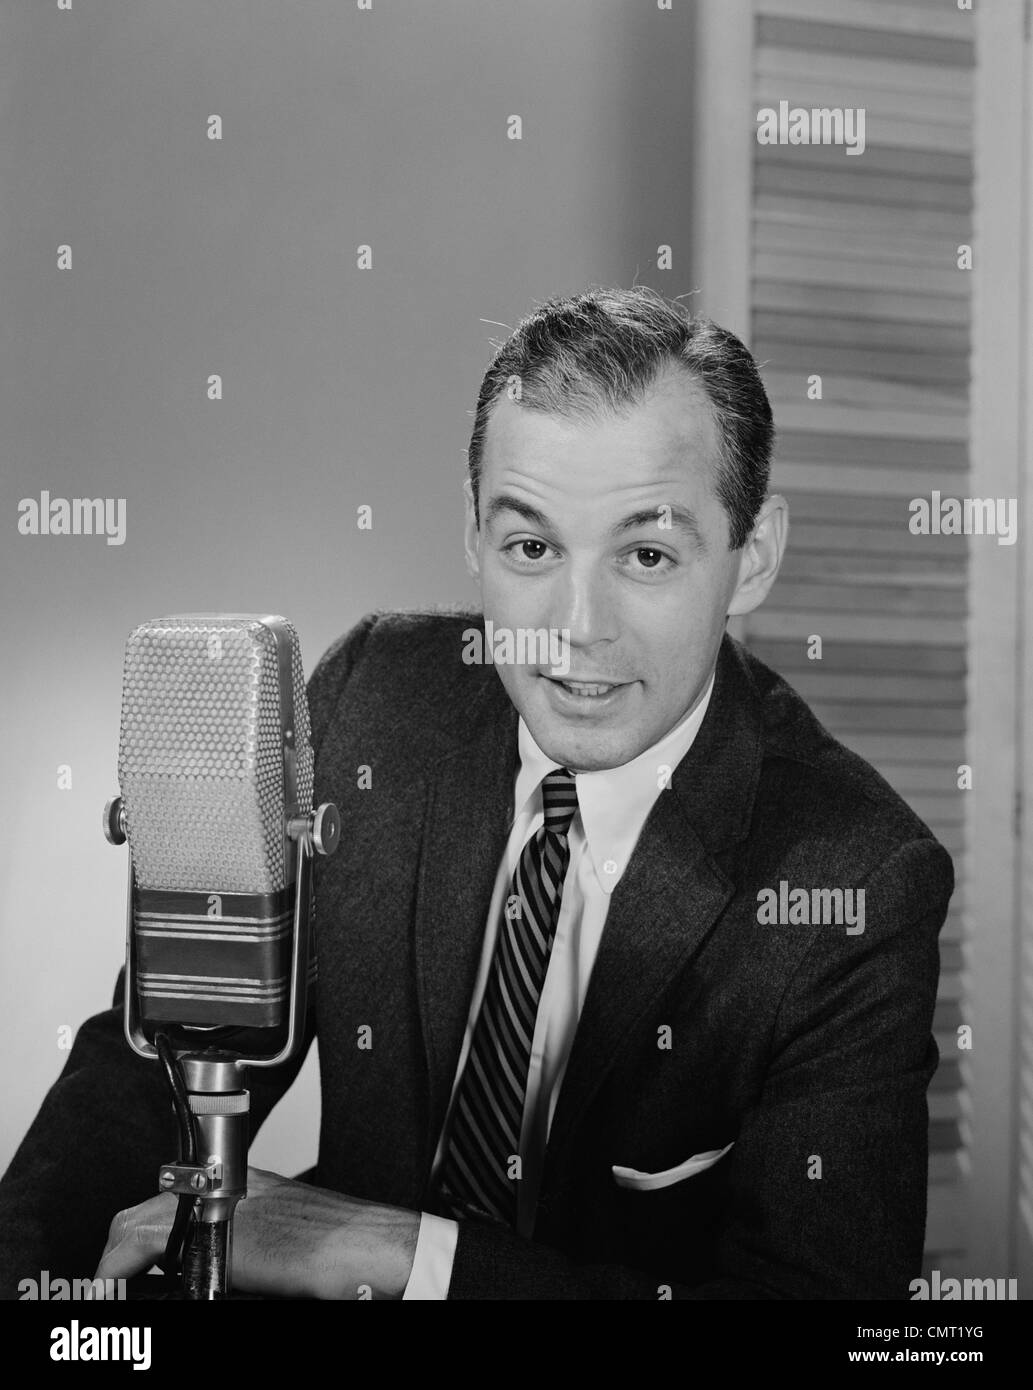 1950s MAN SPEAKING INTO MICROPHONE RADIO TV ANNOUNCER BROADCASTER Stock ...